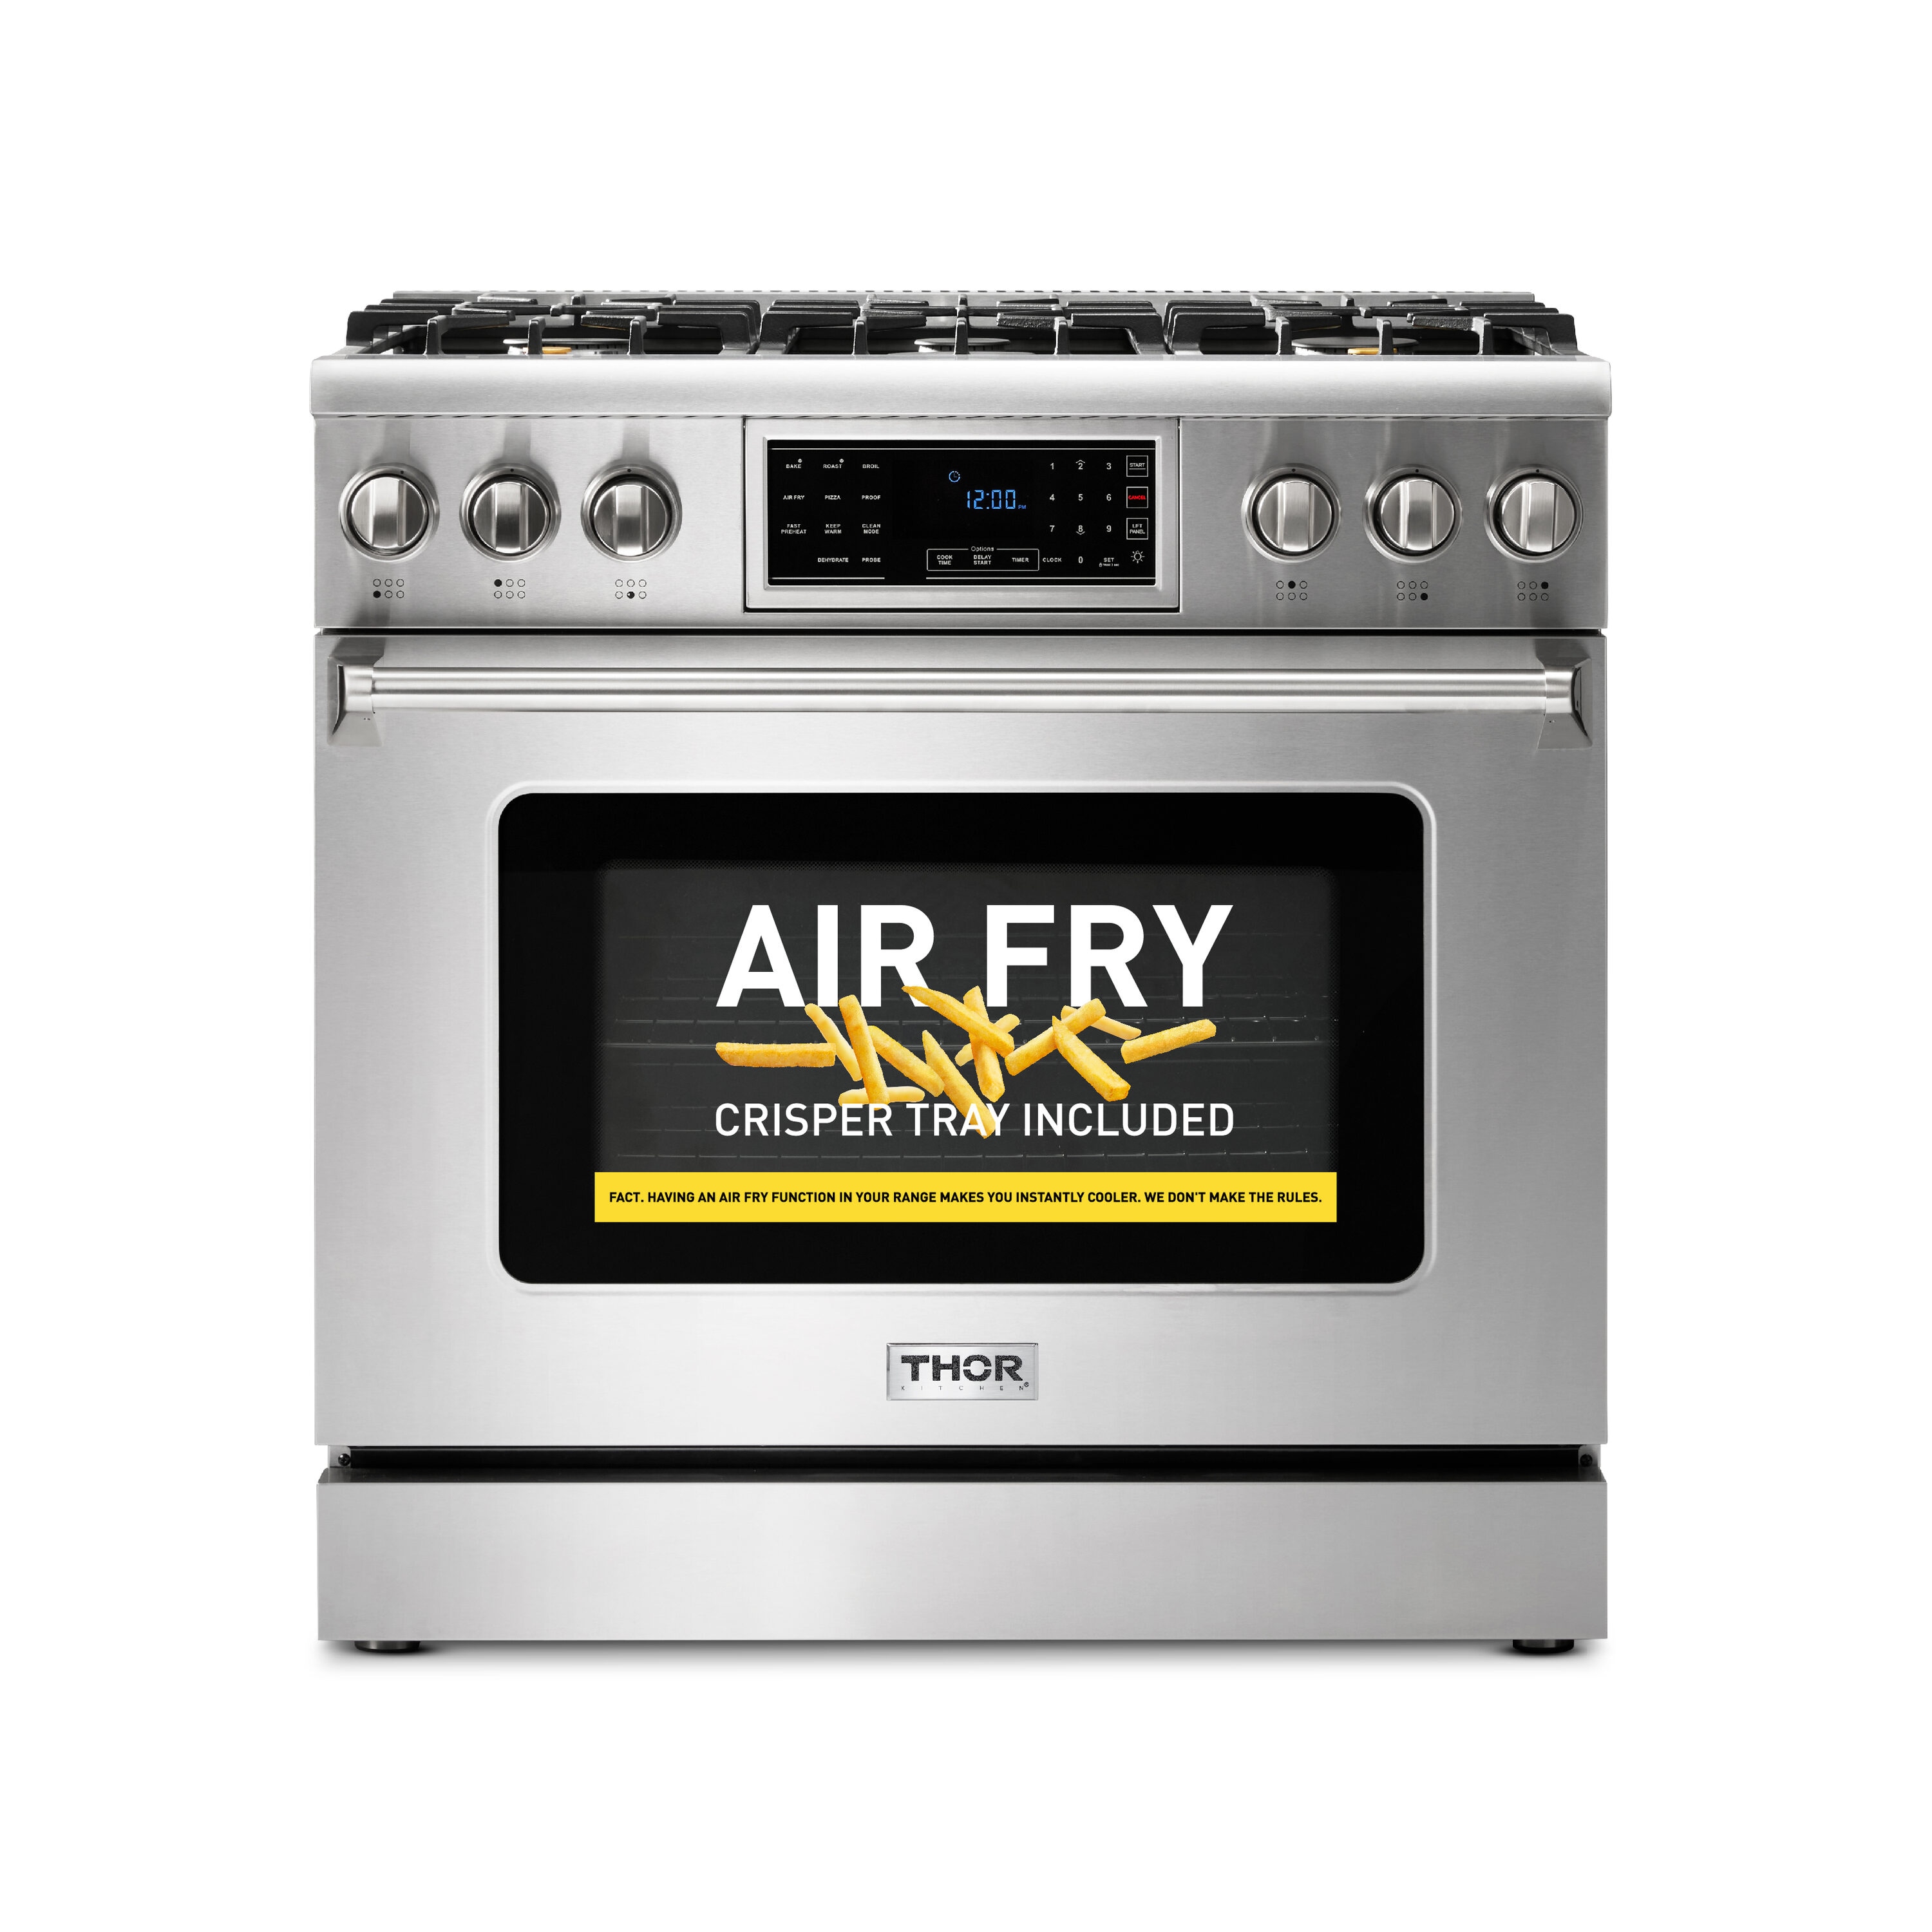 New Viking Professional French-Door Oven Makes Performance and  Accessibility Easy - Viking Range, LLC